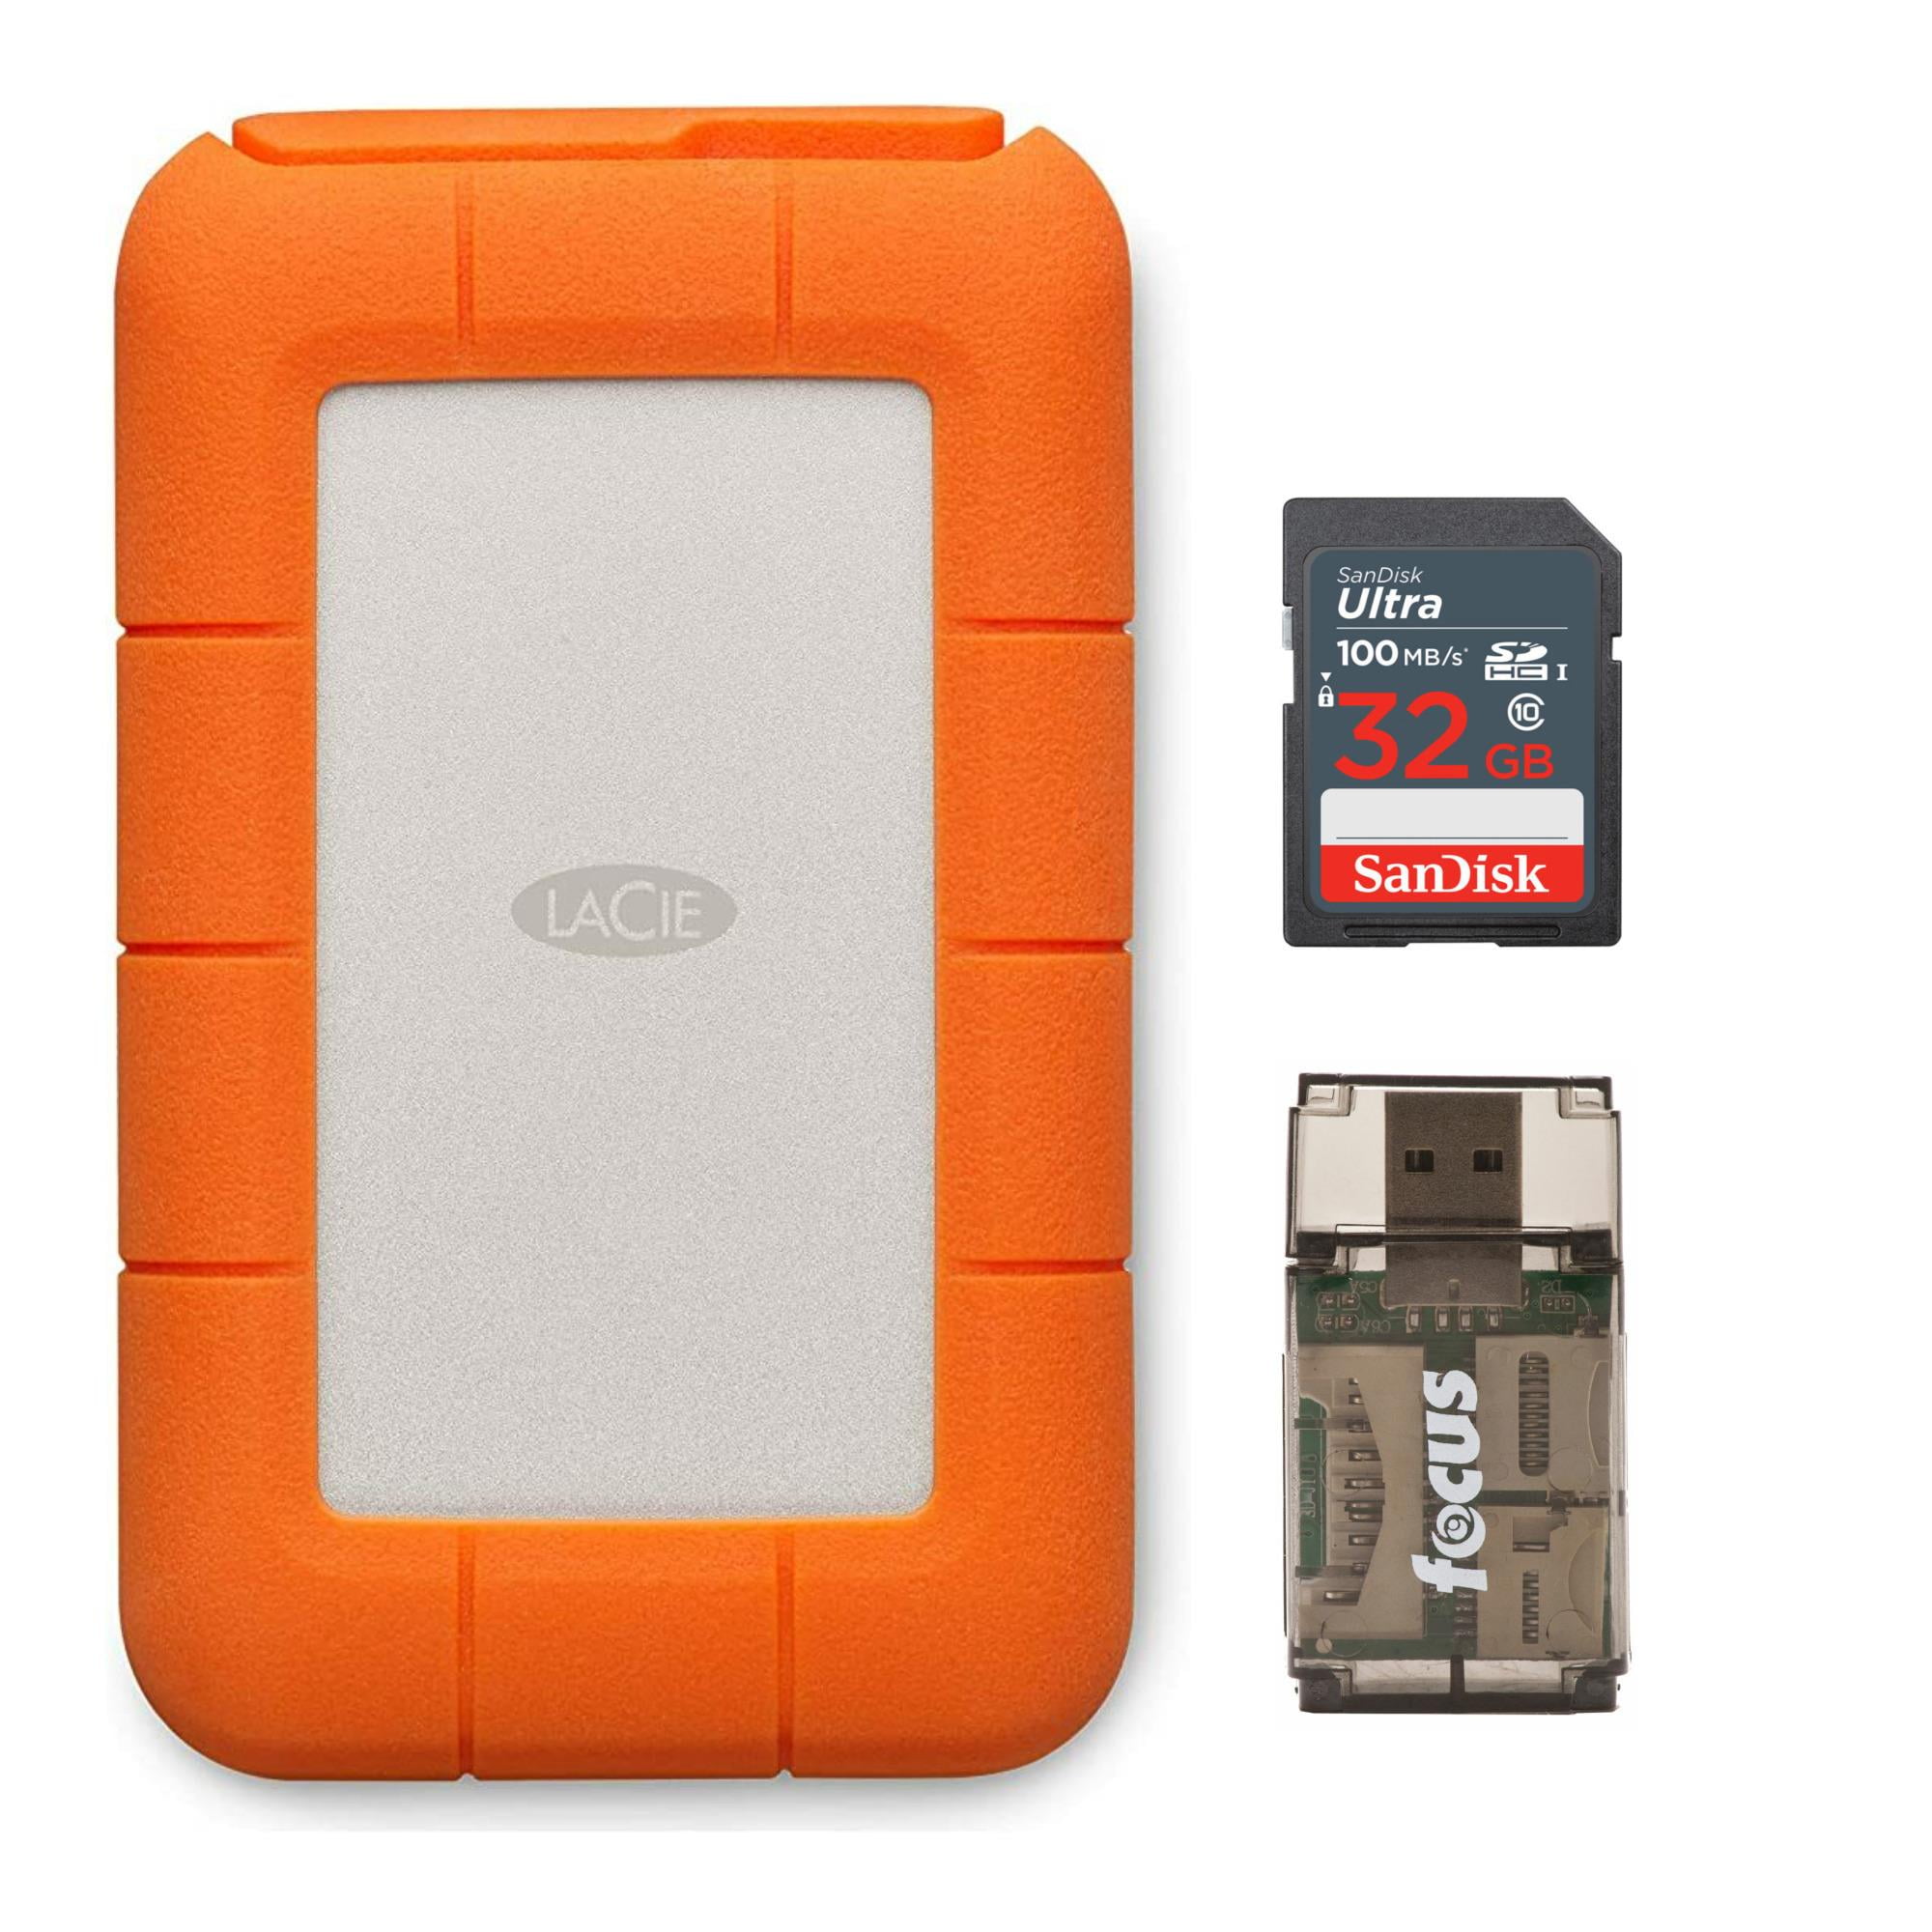 Tough and durable SD cards that will last long